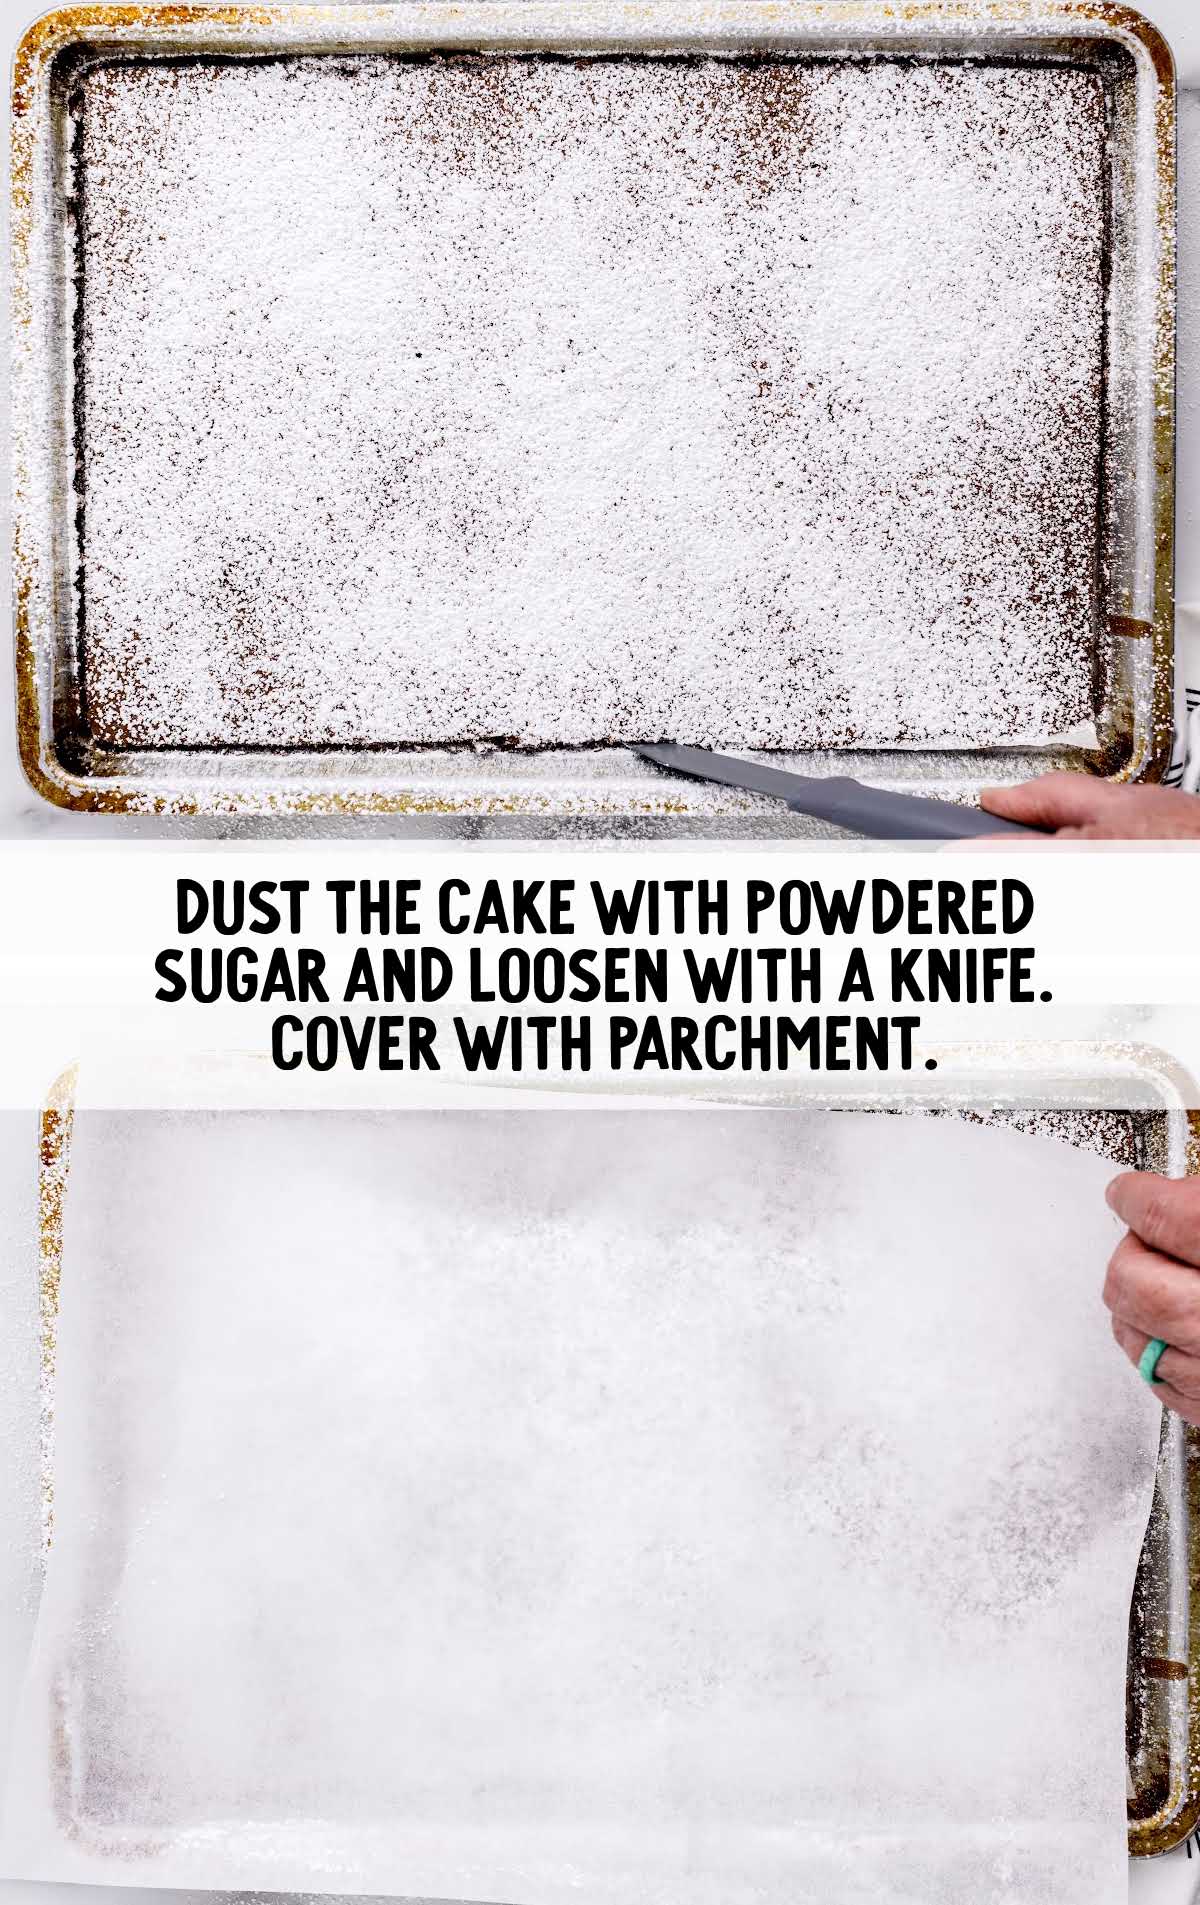 caked dusted with powdered sugar and loosen with knife